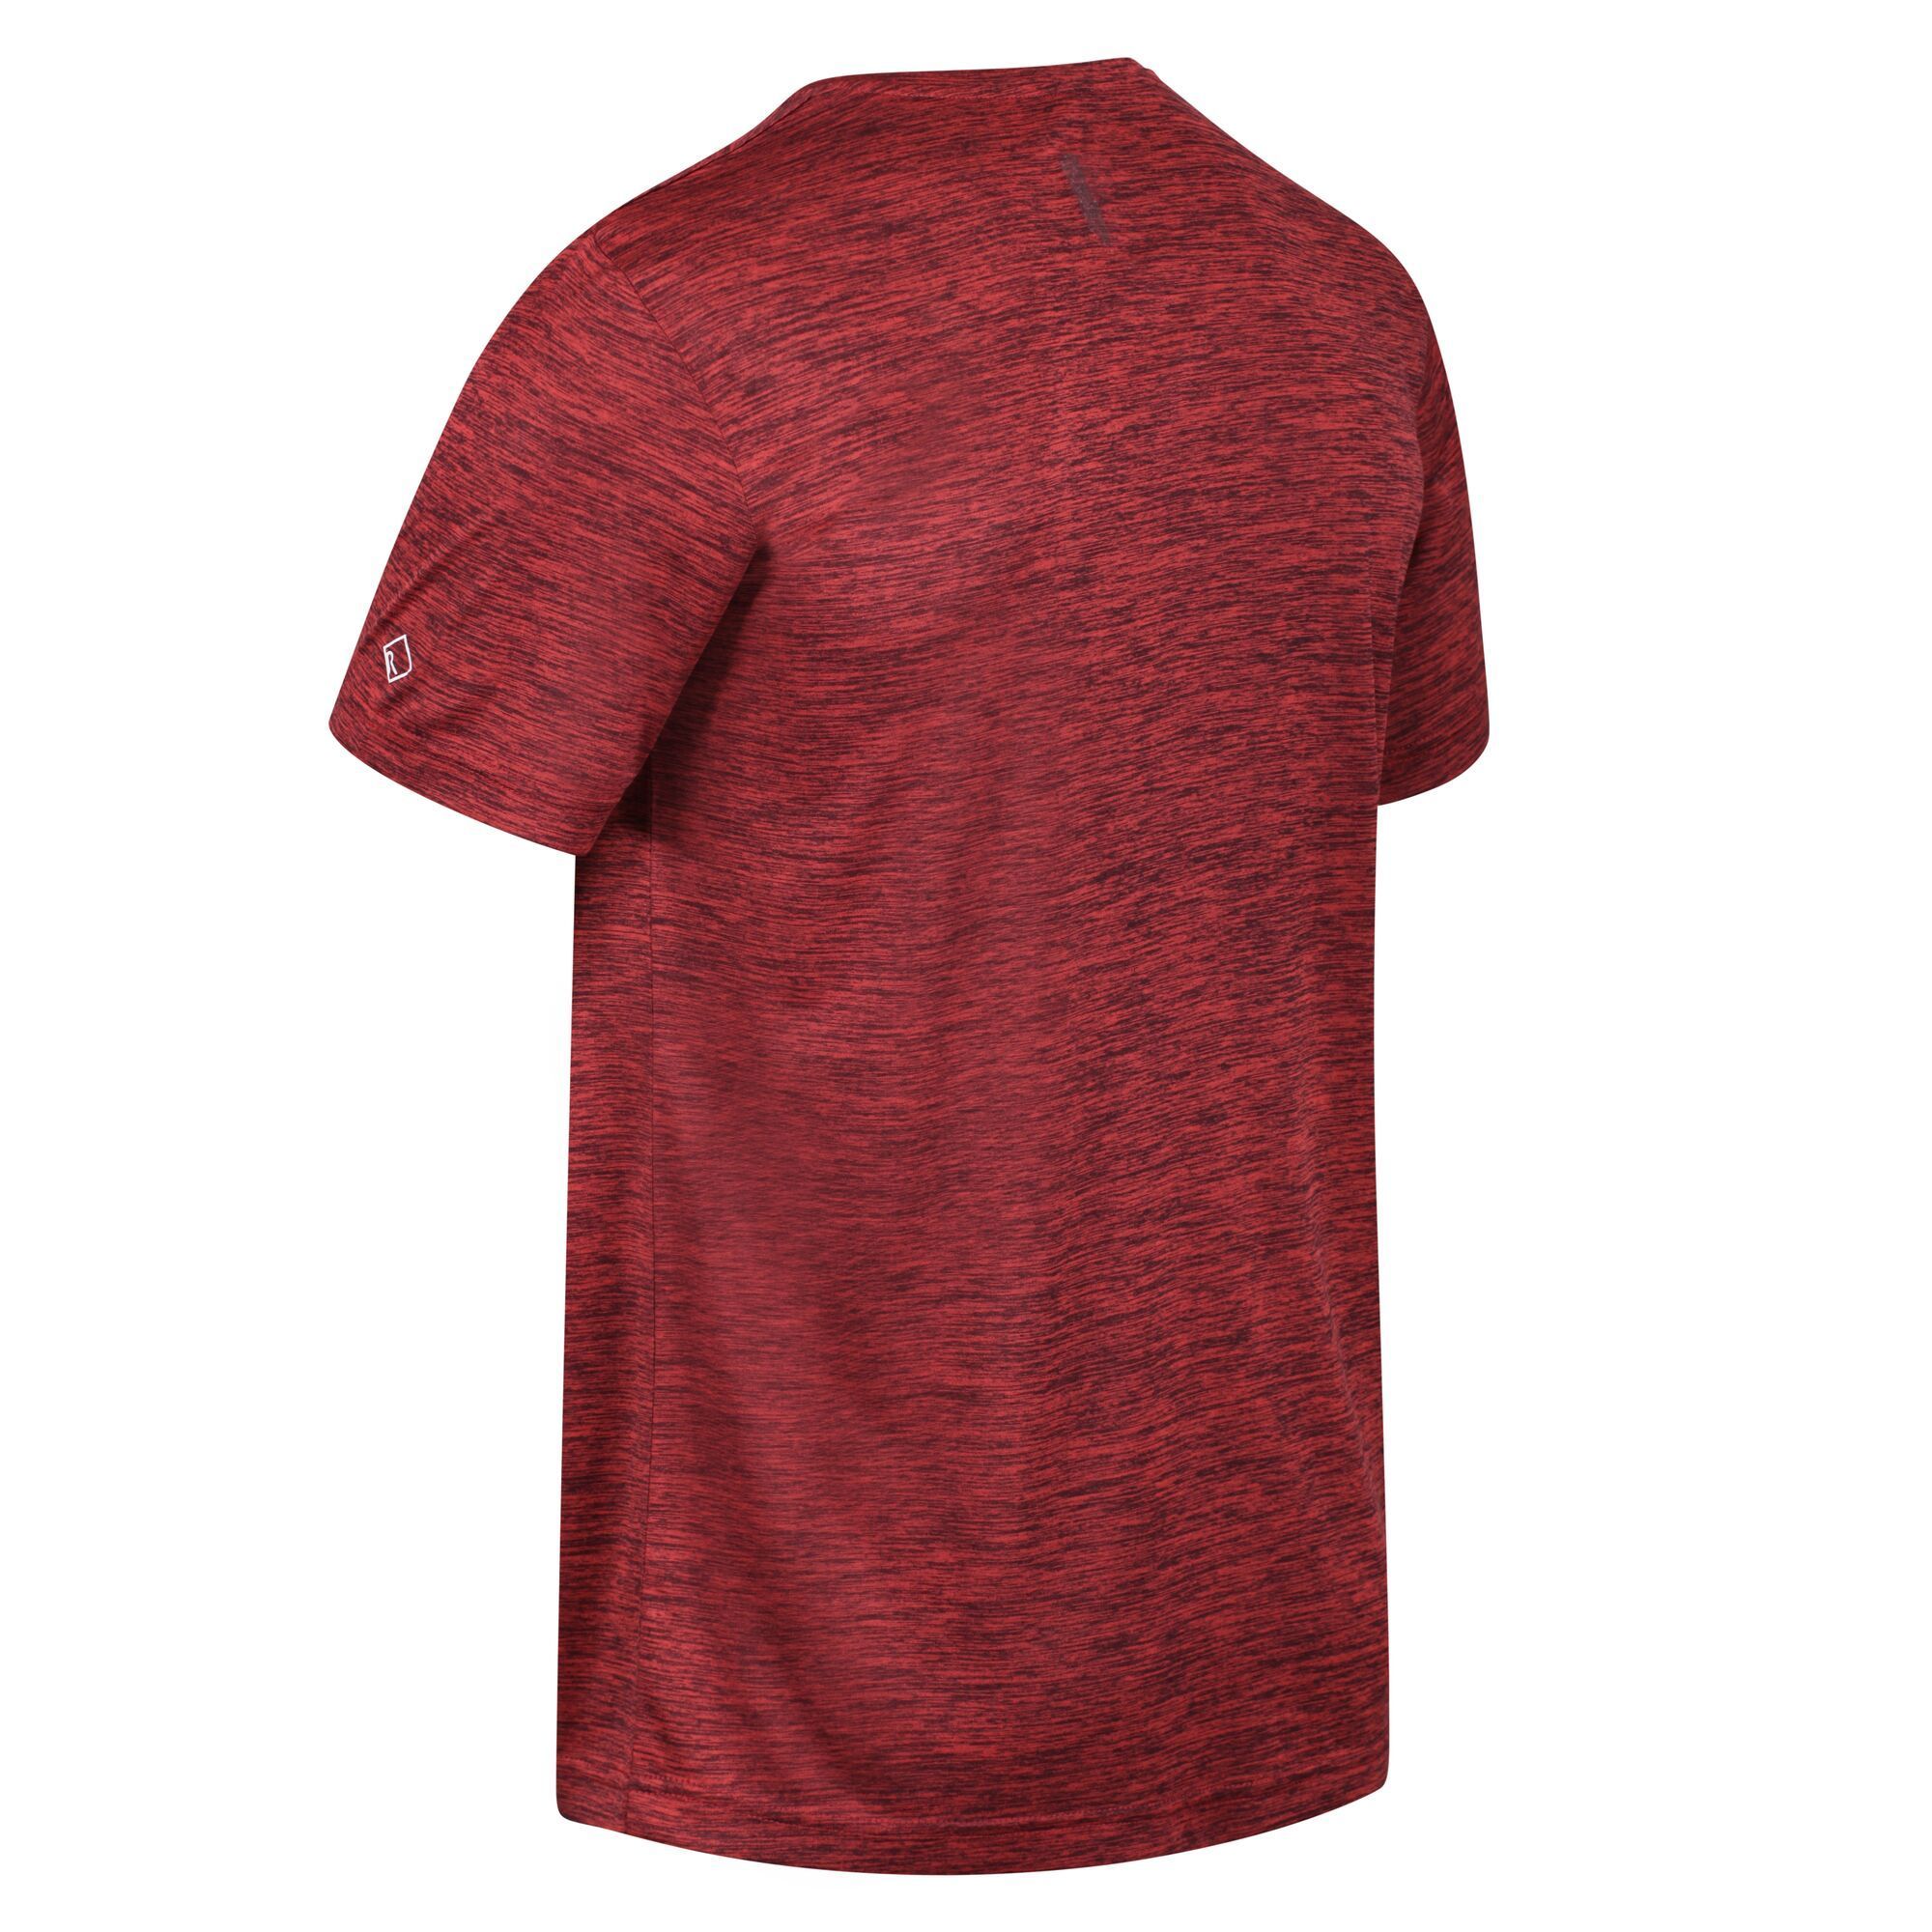 Material: 100% quick dry polyester pique fabric. Good wicking performance. Crew neck. Graphic print.